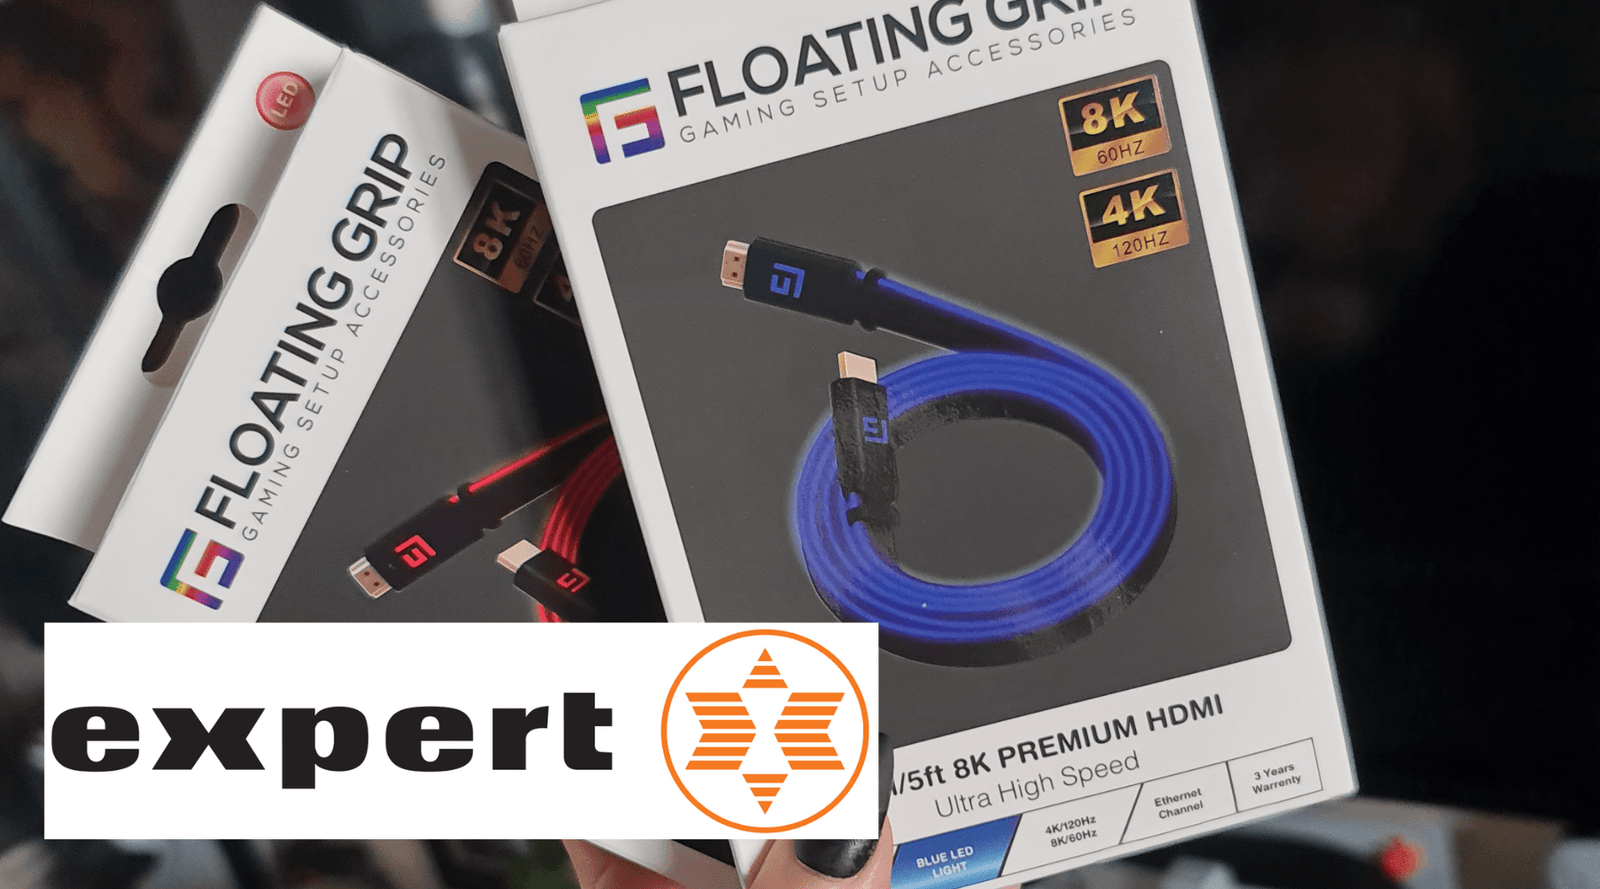 FLOATING GRIP Takes Germany by Storm: Now Available at Expert - FLOATING GRIP